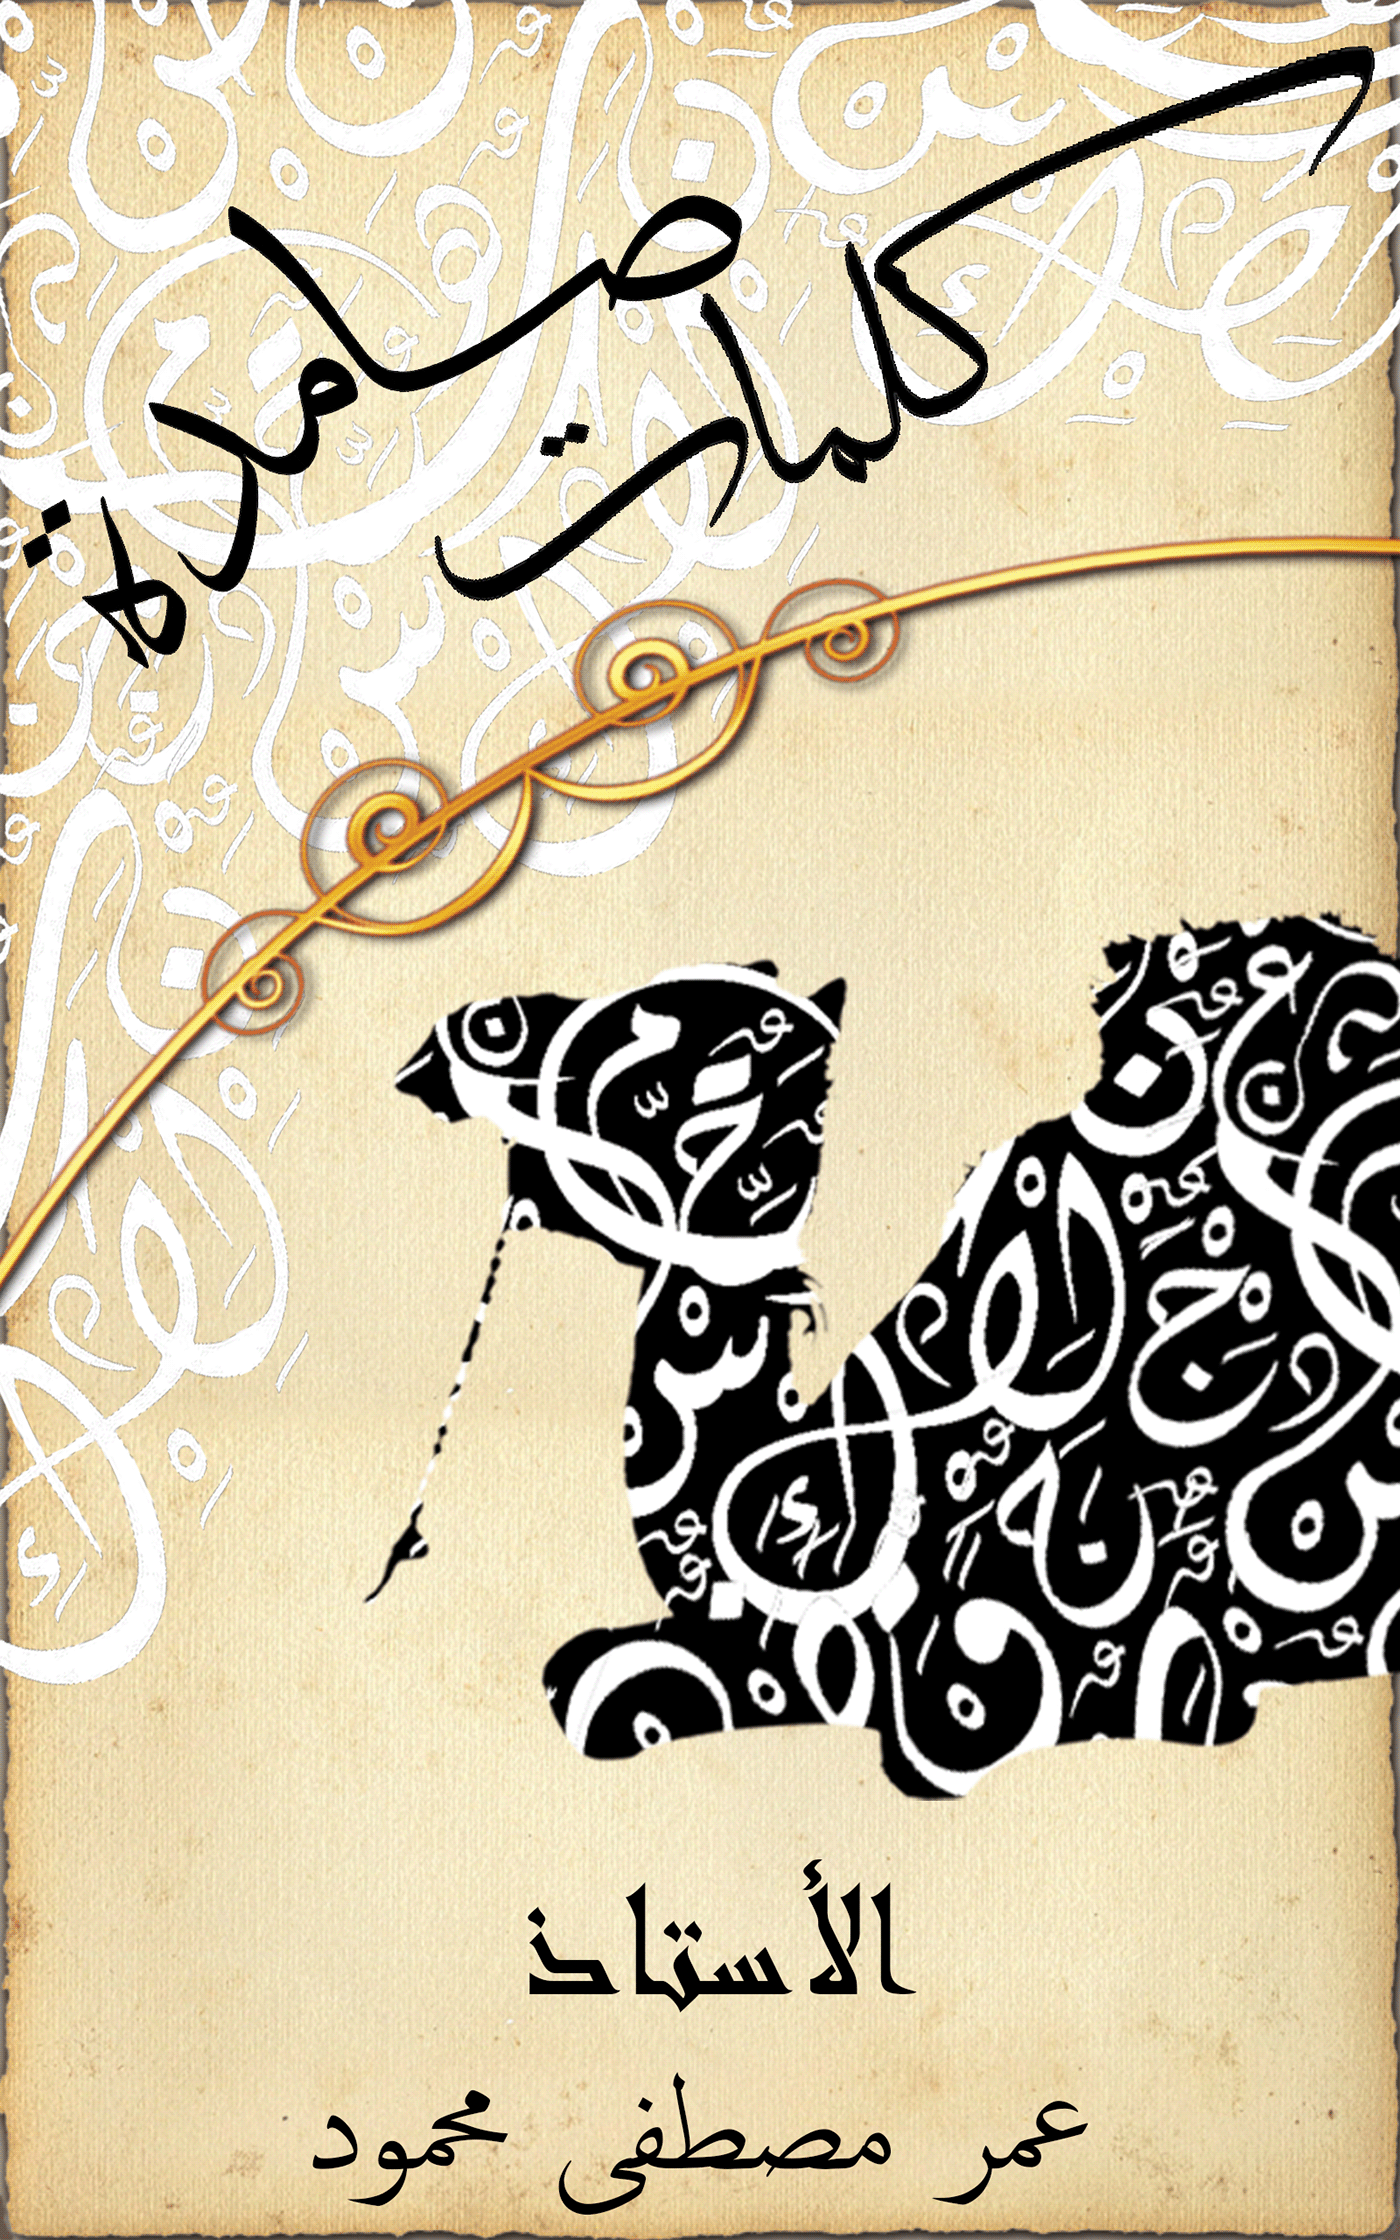 book cover photoshop arabic calligraphy camel papyrus fan made